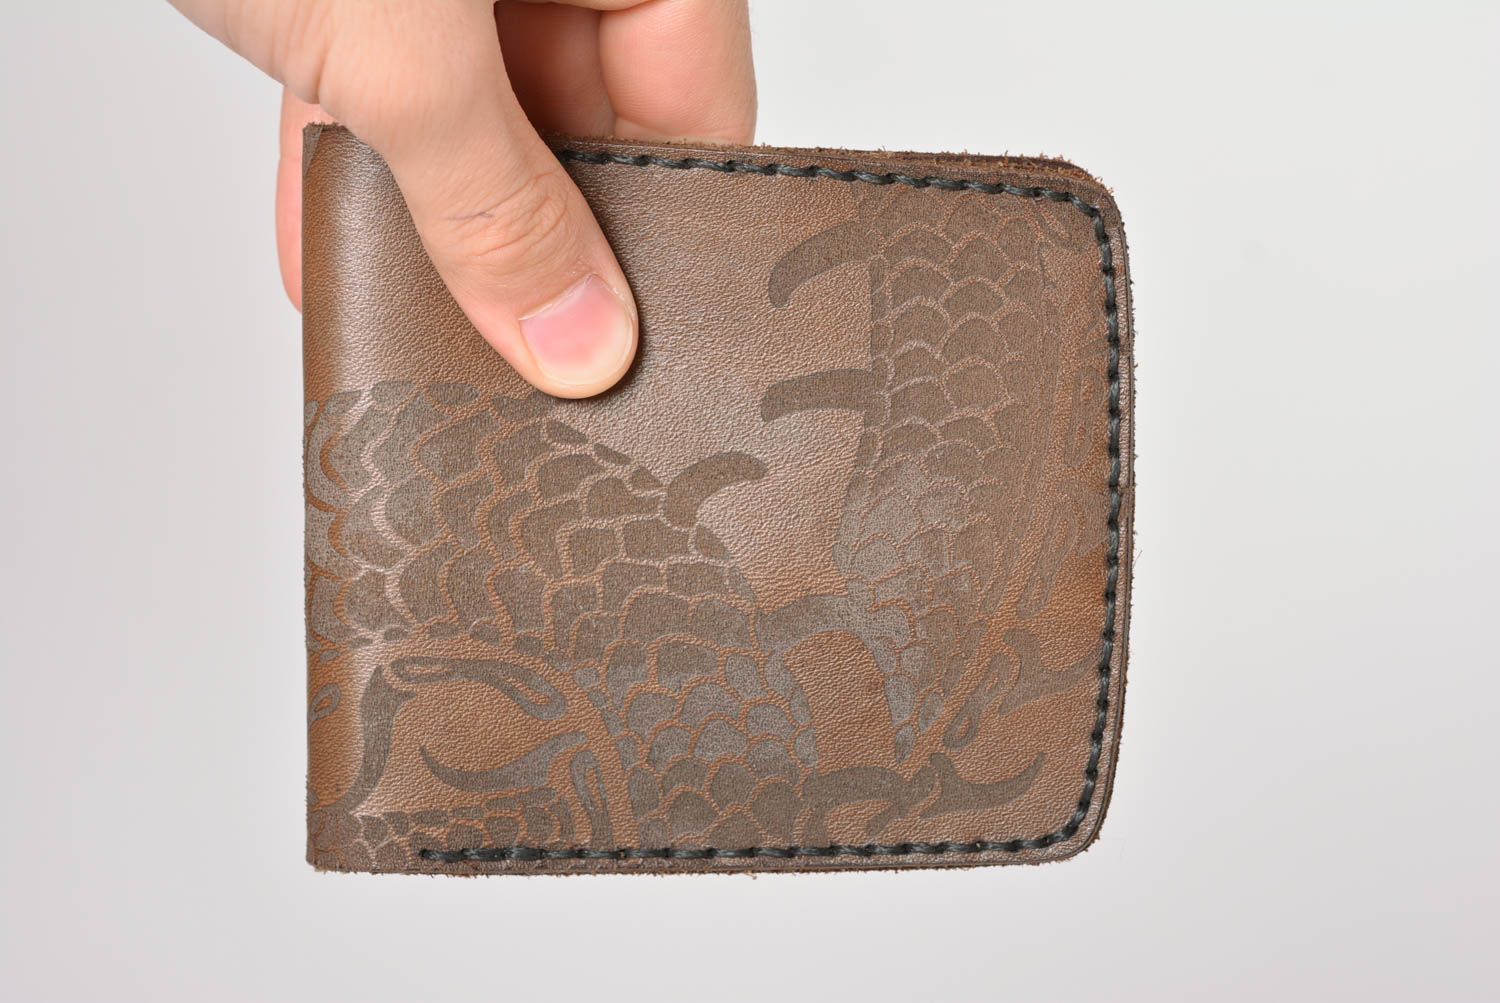 Handmade leather wallet handmade leather goods mens wallet presents for men photo 4